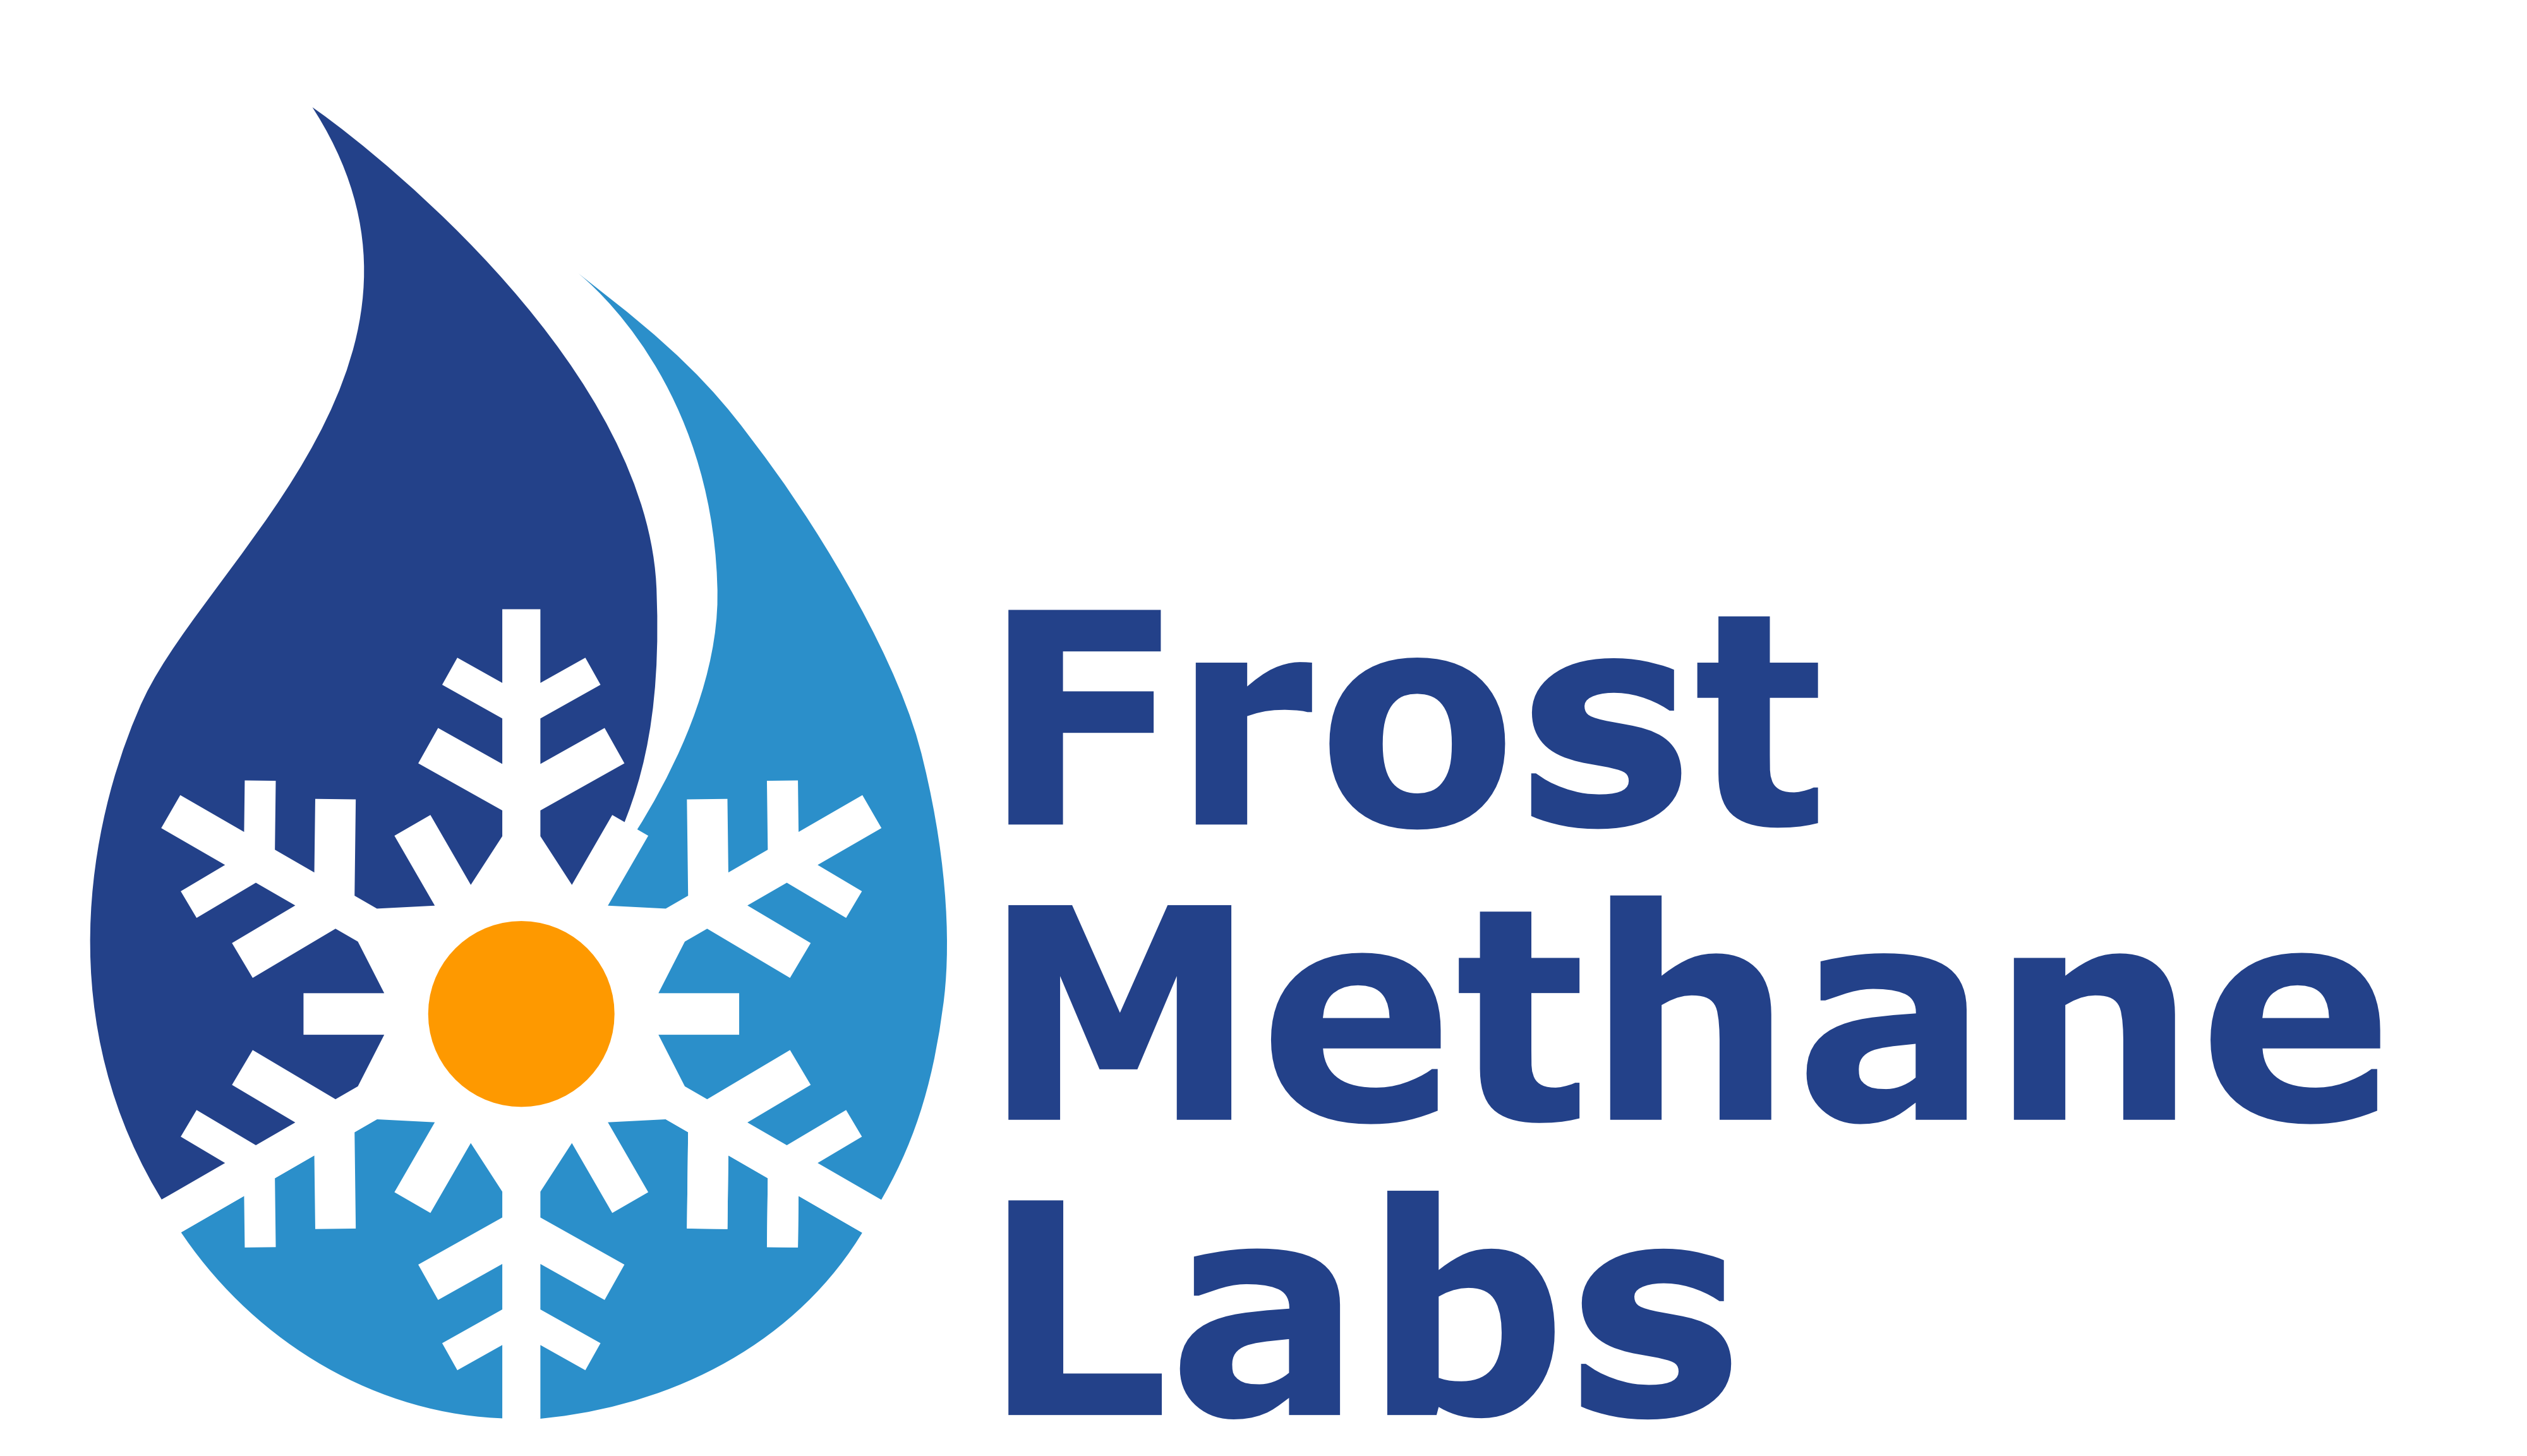 Frost Methane Labs